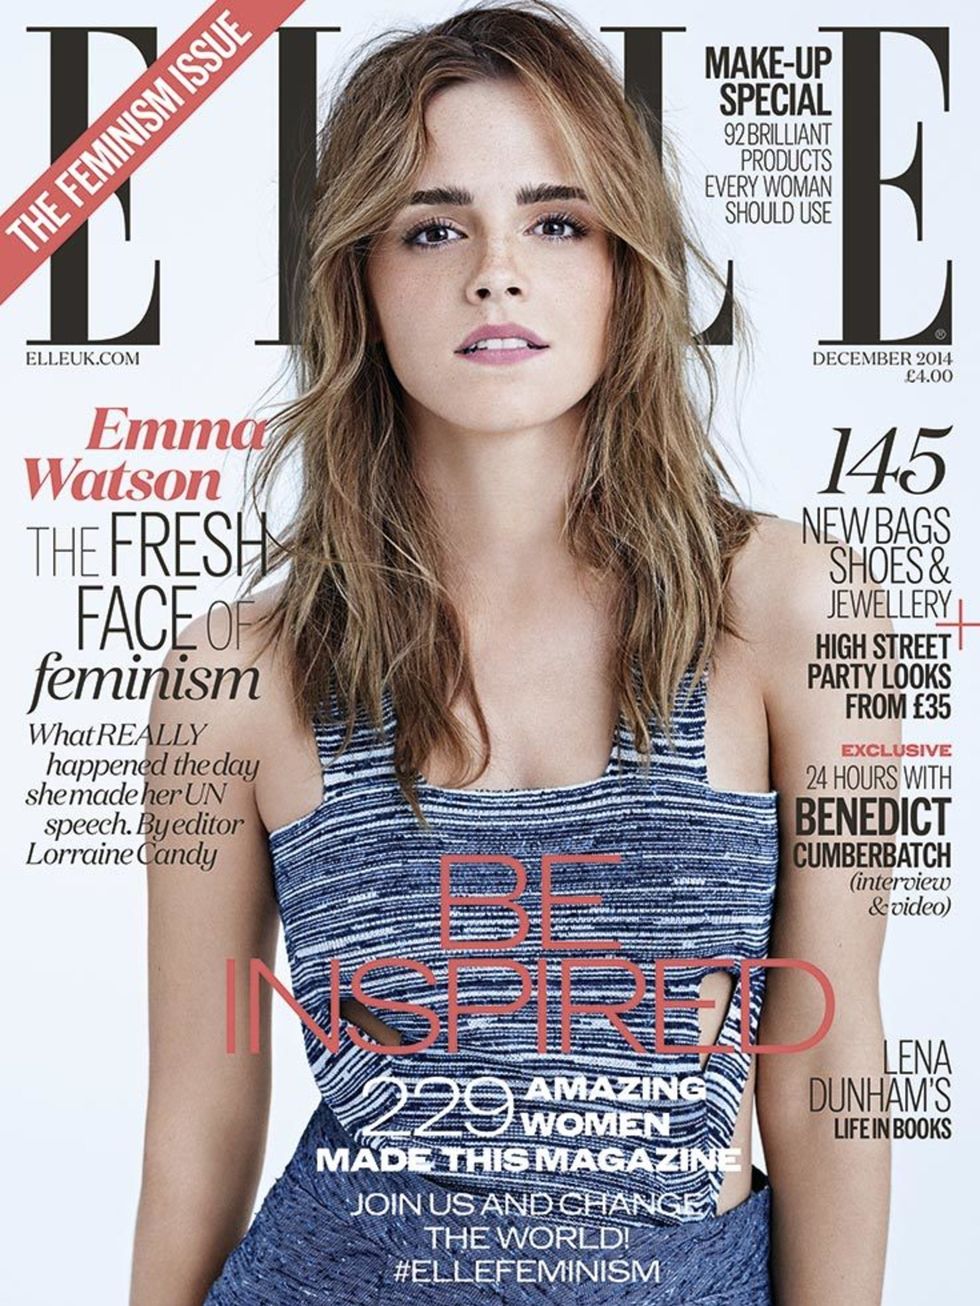 <p><a href="http://www.elleuk.com/tags/emma-watson">Emma Watson</a>, December 2014.</p>

<p><em><a href="http://www.elleuk.com/subscribe" style="color: rgb(7, 130, 193);">Subscribe to ELLE today and never miss an issue</a></em></p>